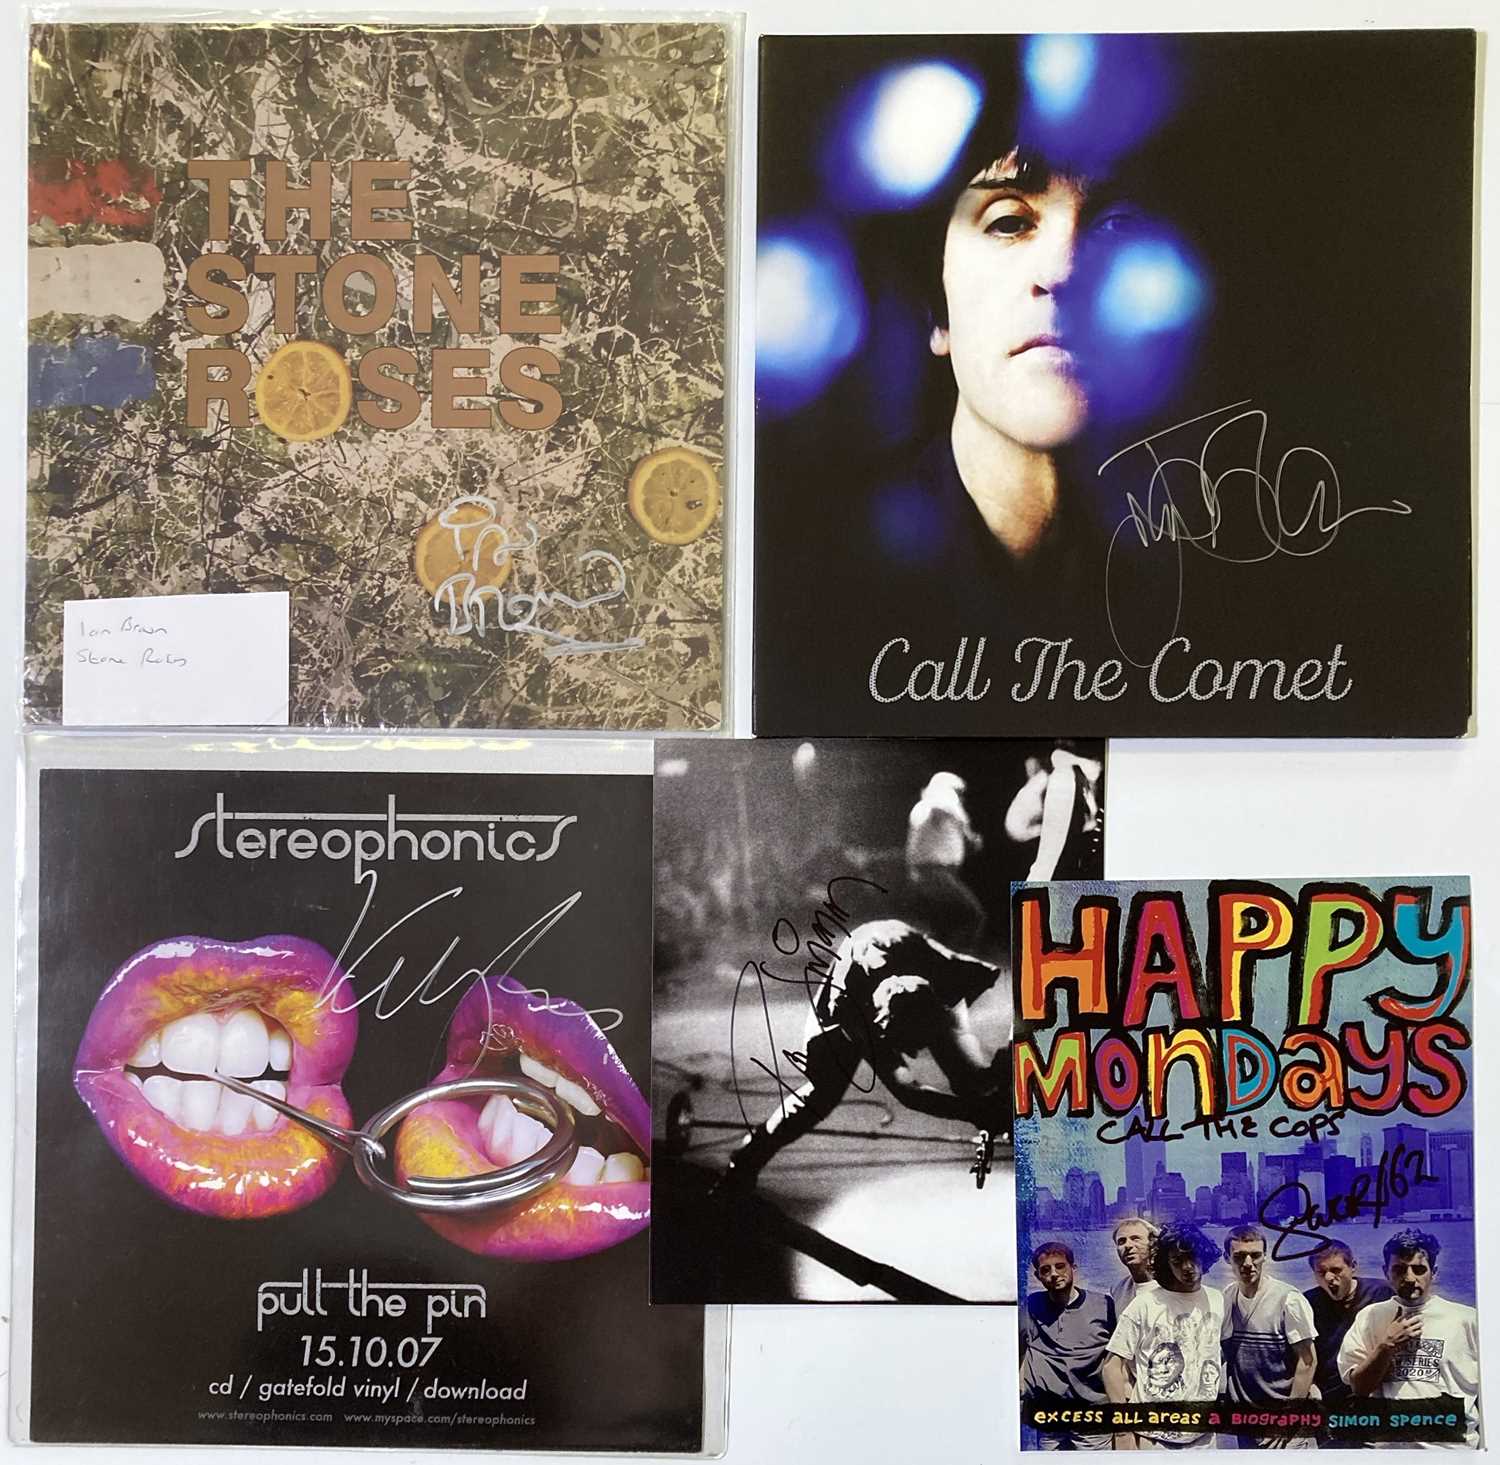 Lot 218 - SIGNED ITEMS - INDIE ARTISTS - JOHNNY MARR / STEREOPHONICS ETC.